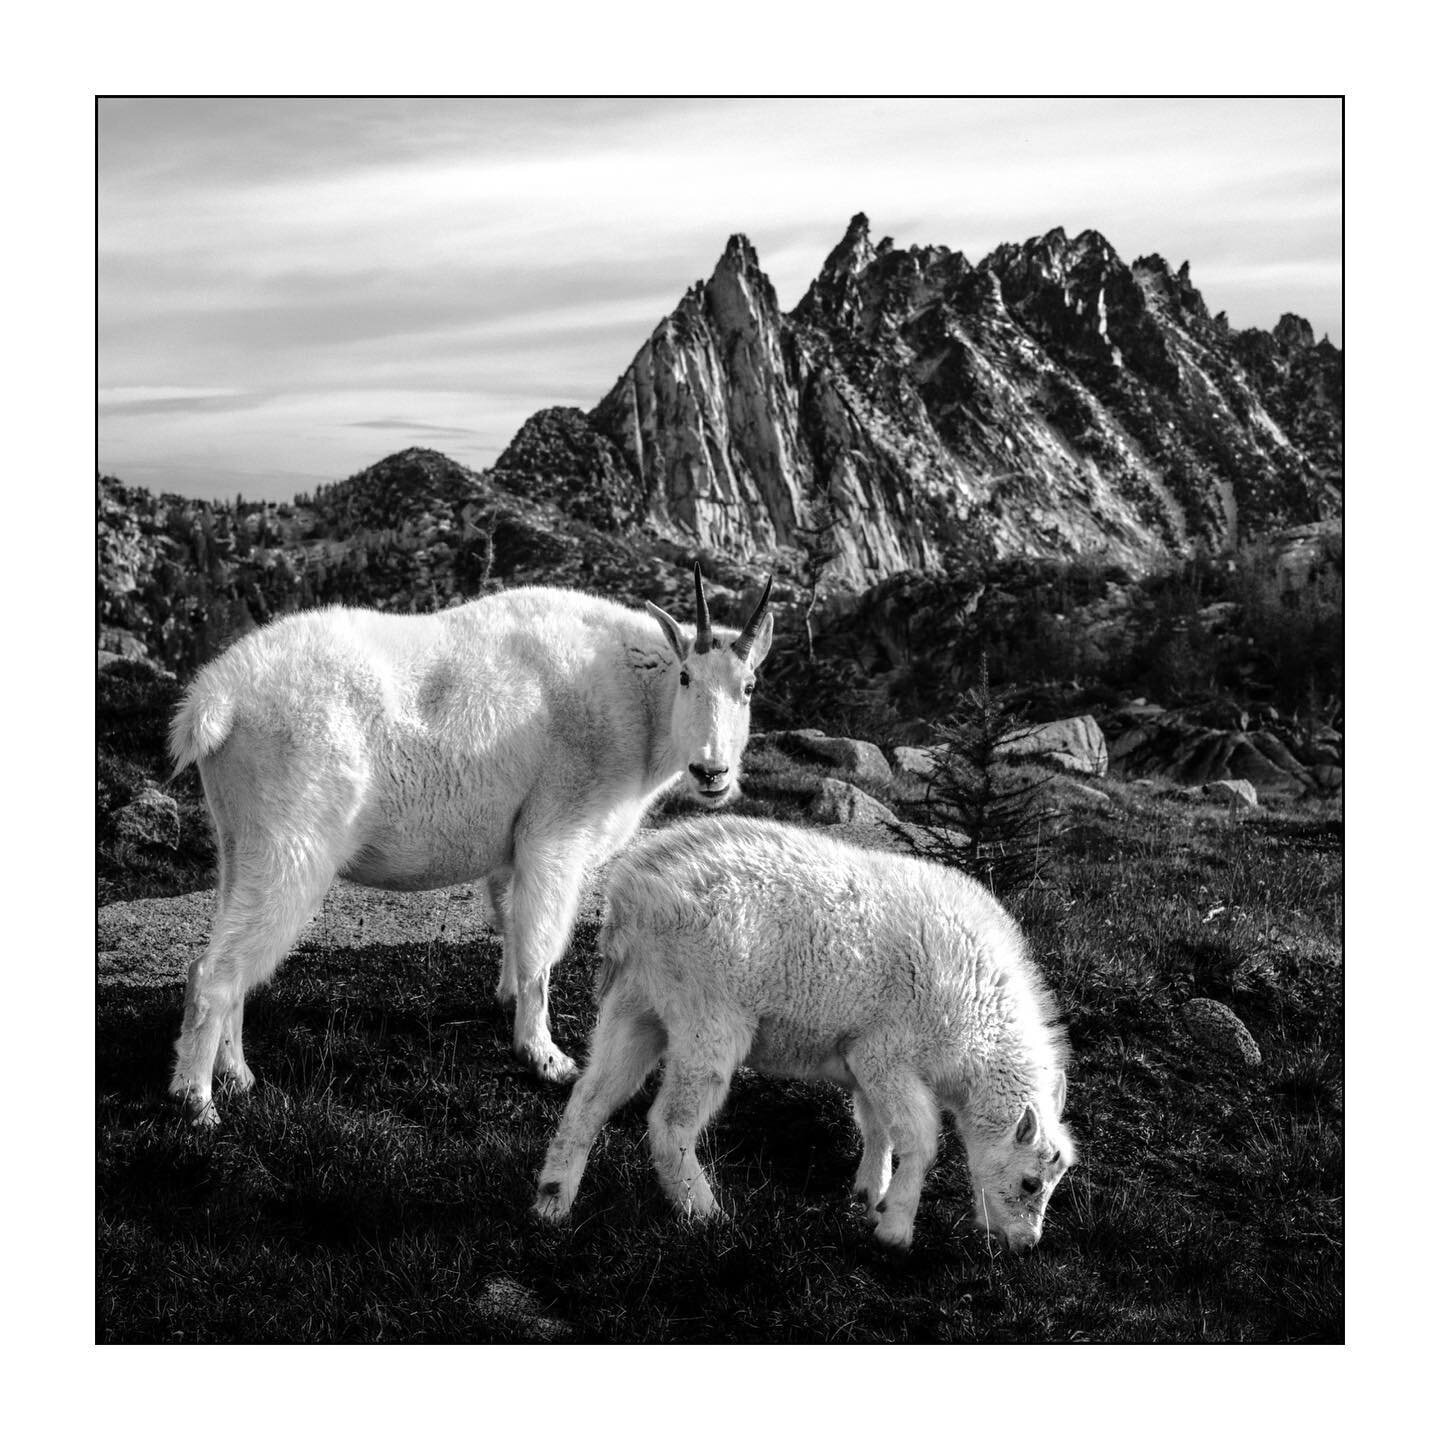 Keeper of the Alpine

Sitting in the heart of nature, surrounded by the mysticism and wonder of the natural world and these inquisitive mountain goats, we couldn&rsquo;t help but reflect on how we ended up here.

Amongst a place where solace is inher